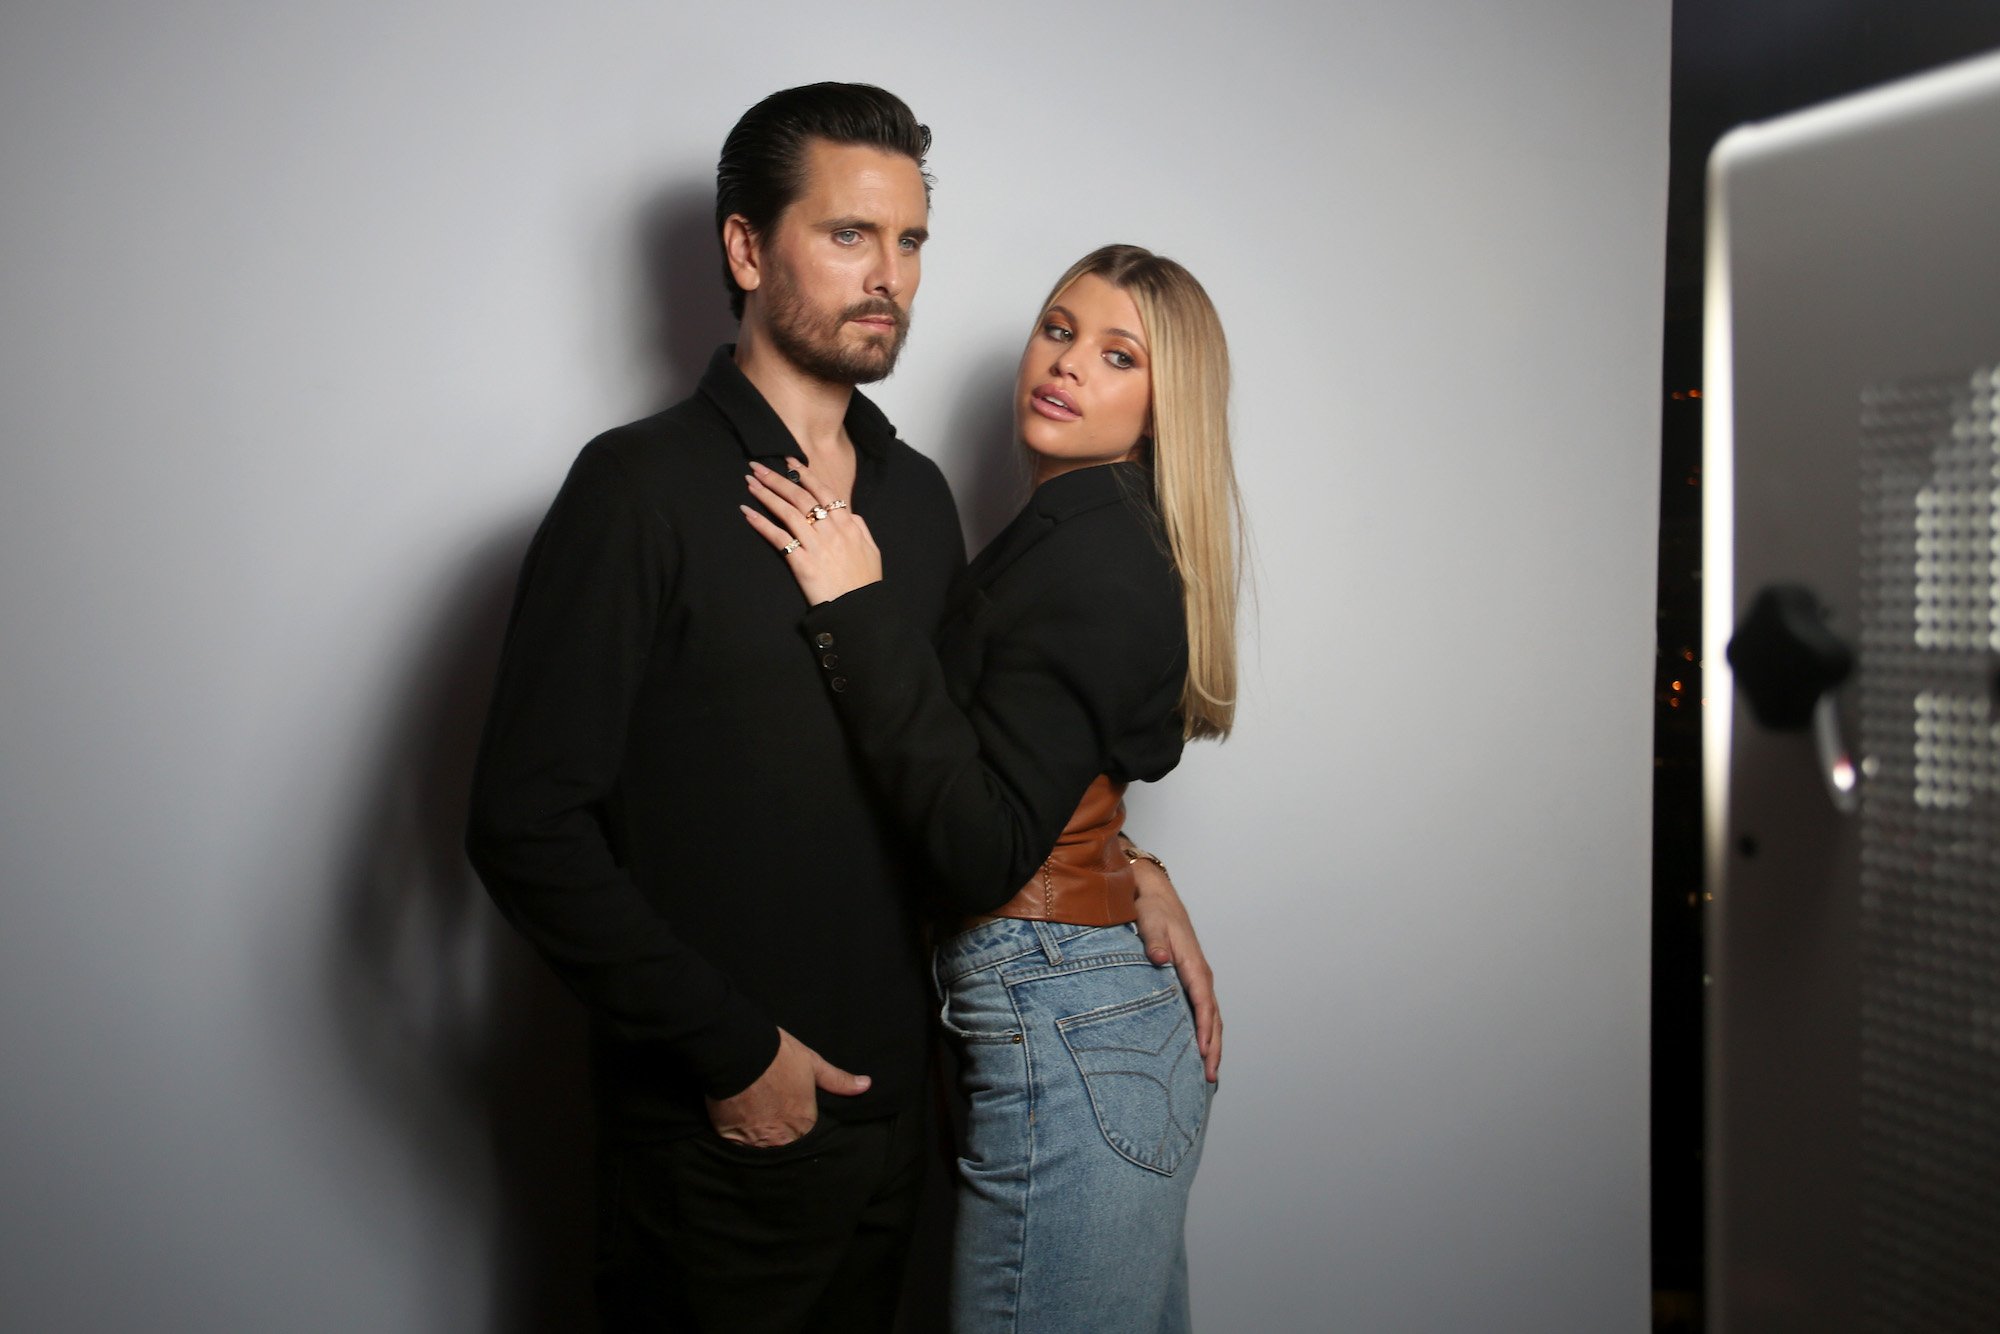 Sofia Richie’s Reported Response to Scott Disick’s Claims About Their Breakup Is Messy